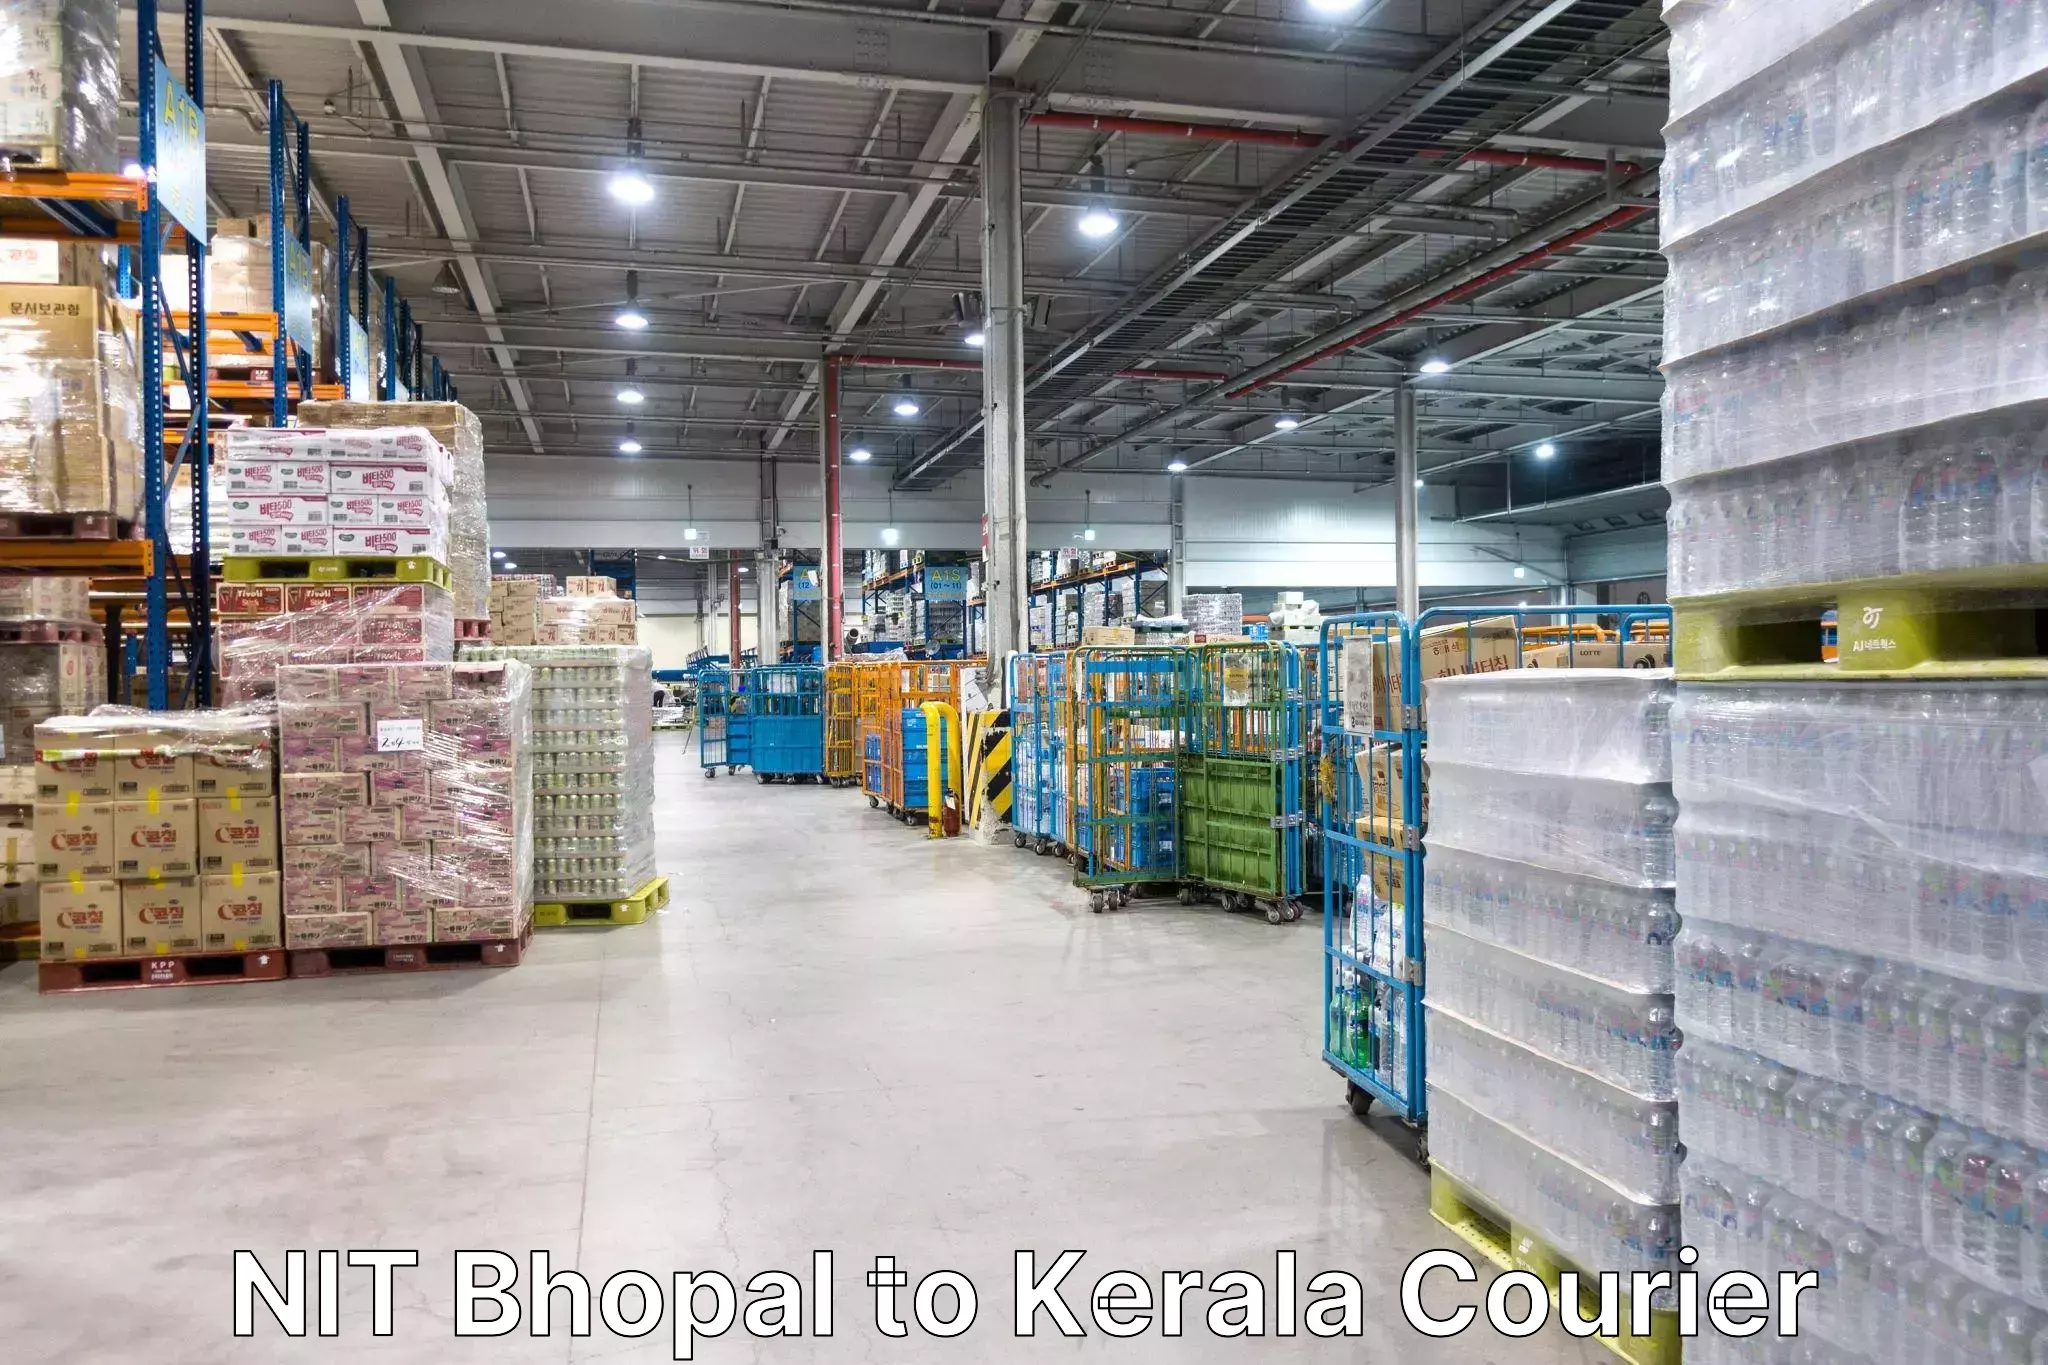 On-call courier service NIT Bhopal to Kerala